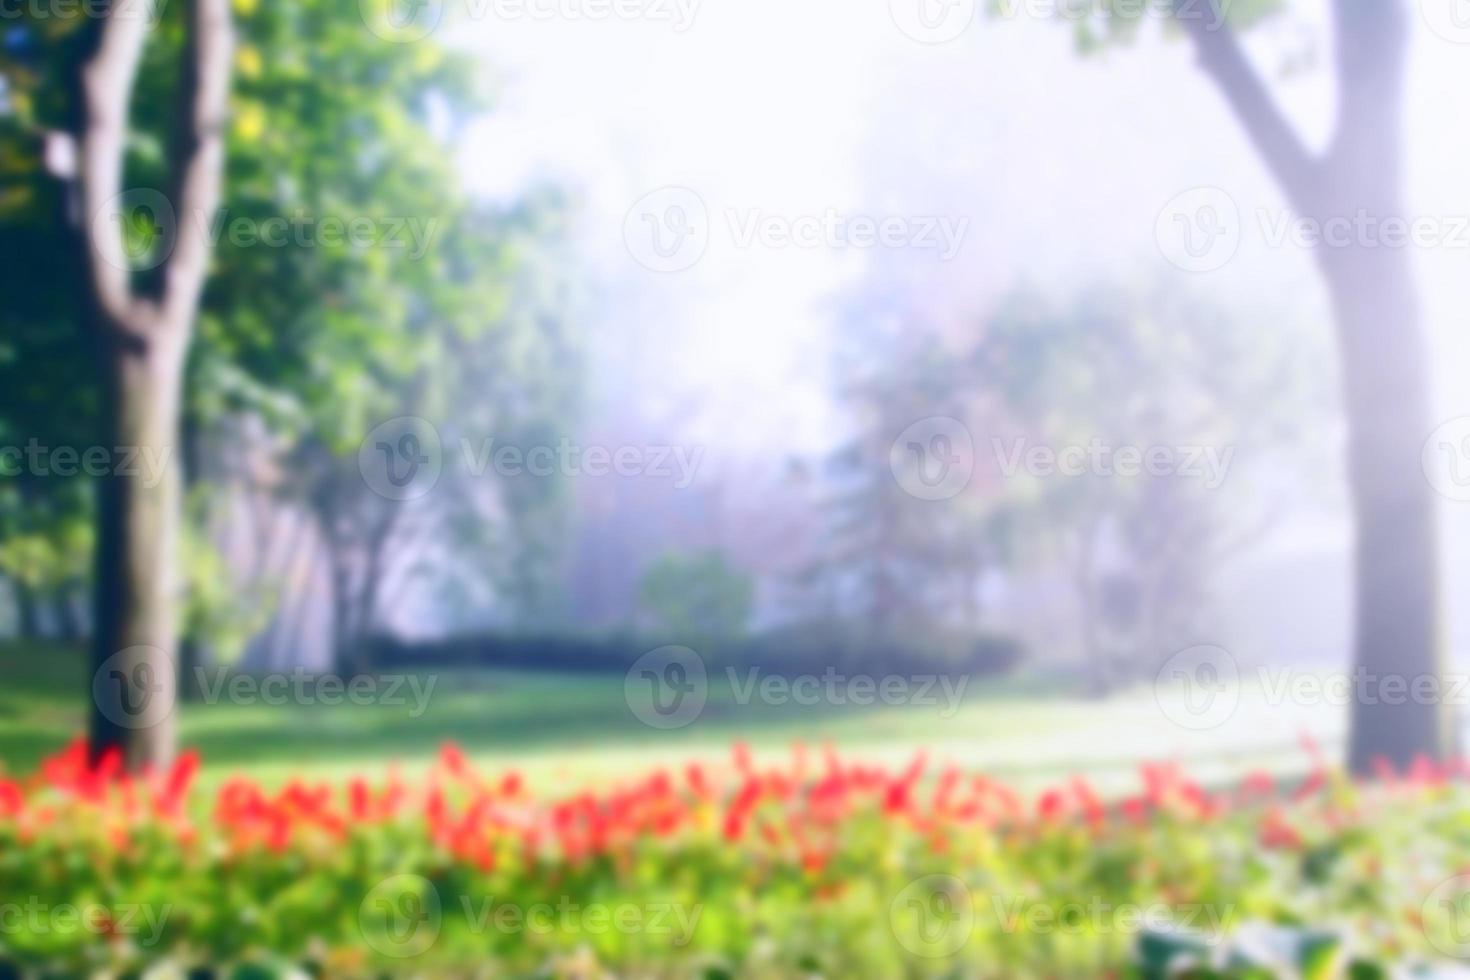 red flover in forrest blurred background, nature concept photo